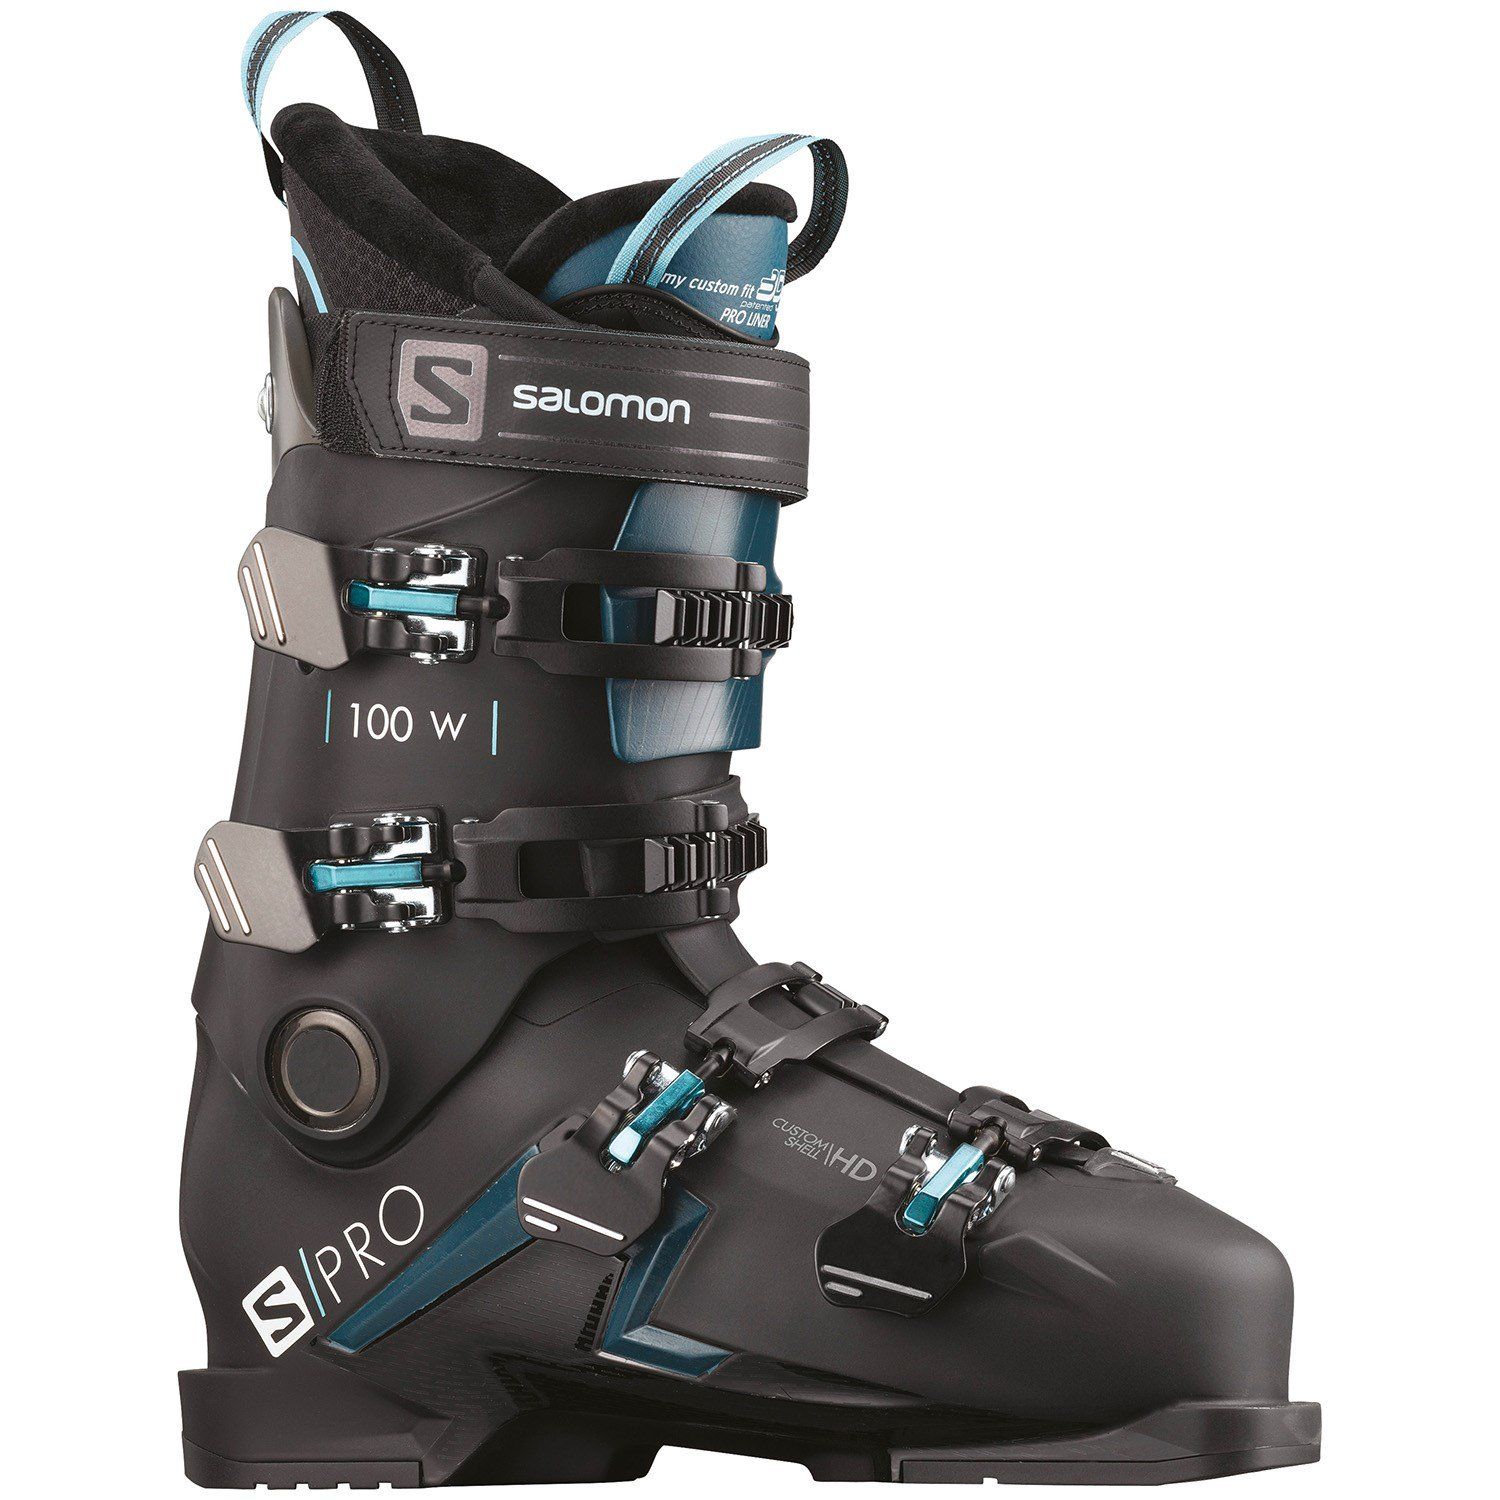 Salomon Ski boots: Ideal For Men And
Women as Well